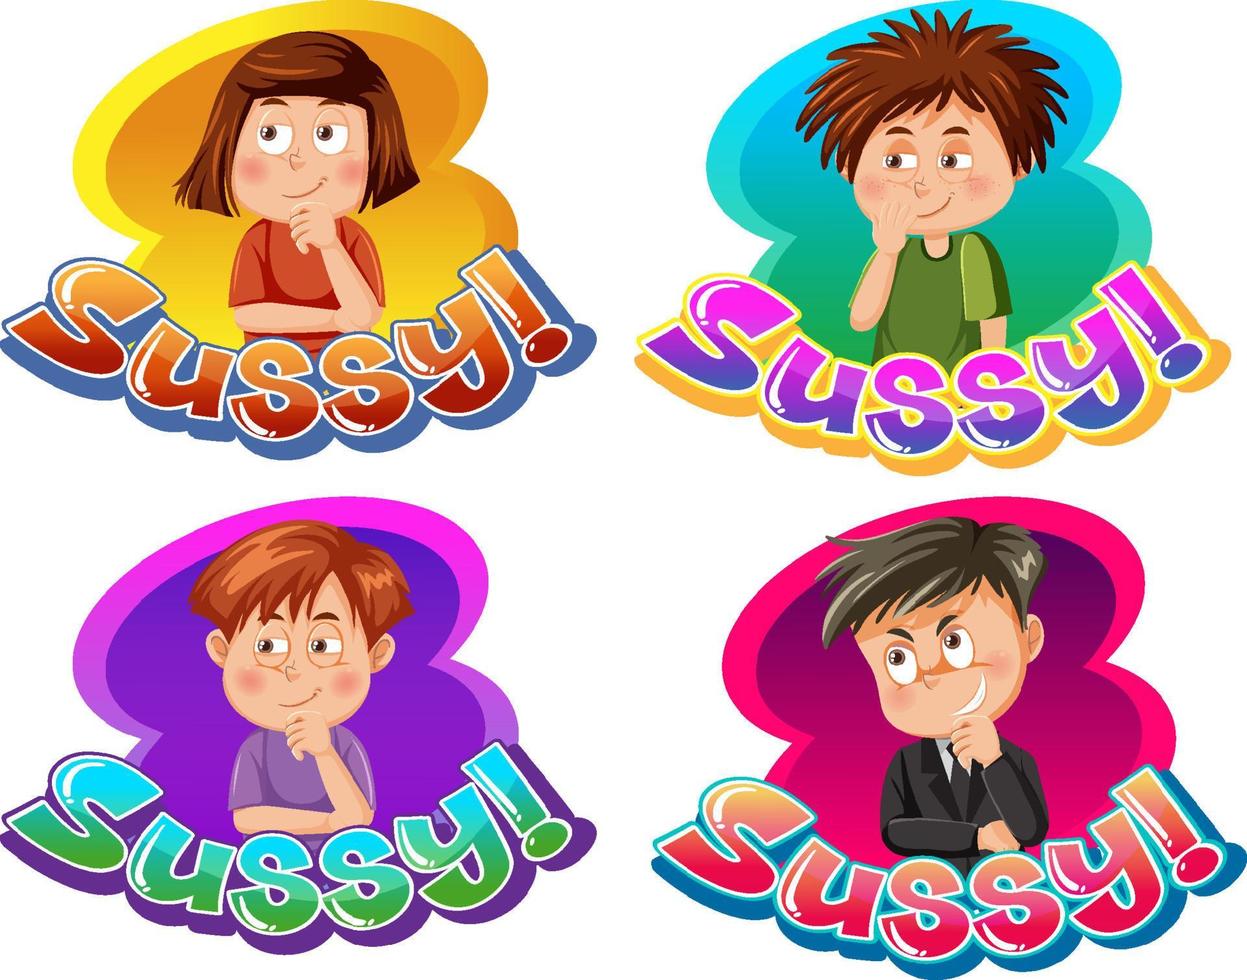 Sussy text word banner comic style with cartoon character expression vector